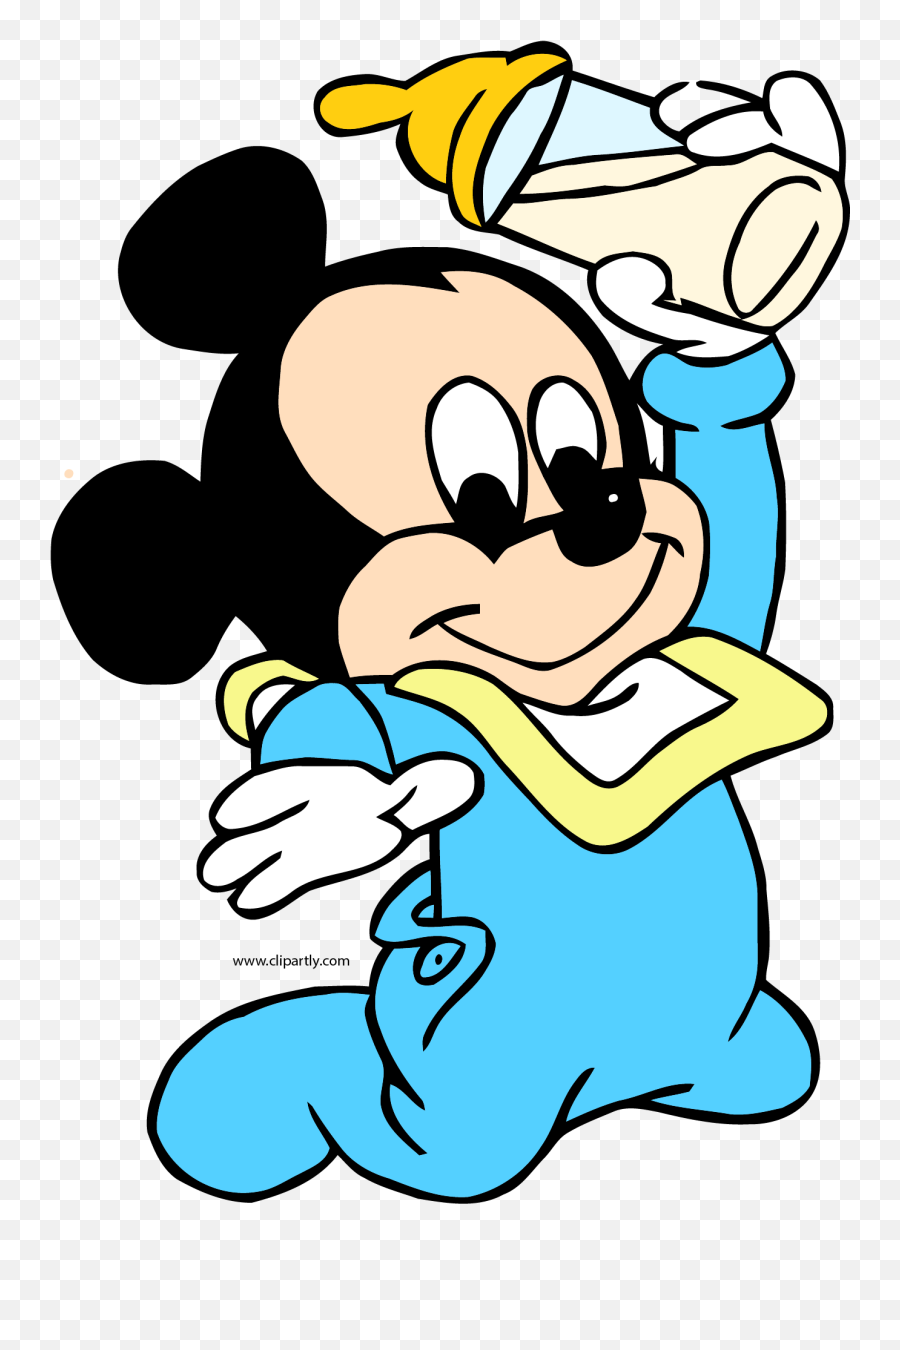 Baby Mickey Bottle Clipart Png U2013 Clipartlycom - Clip Art Of Baby Mickey Mouse,Baby Bottle Png